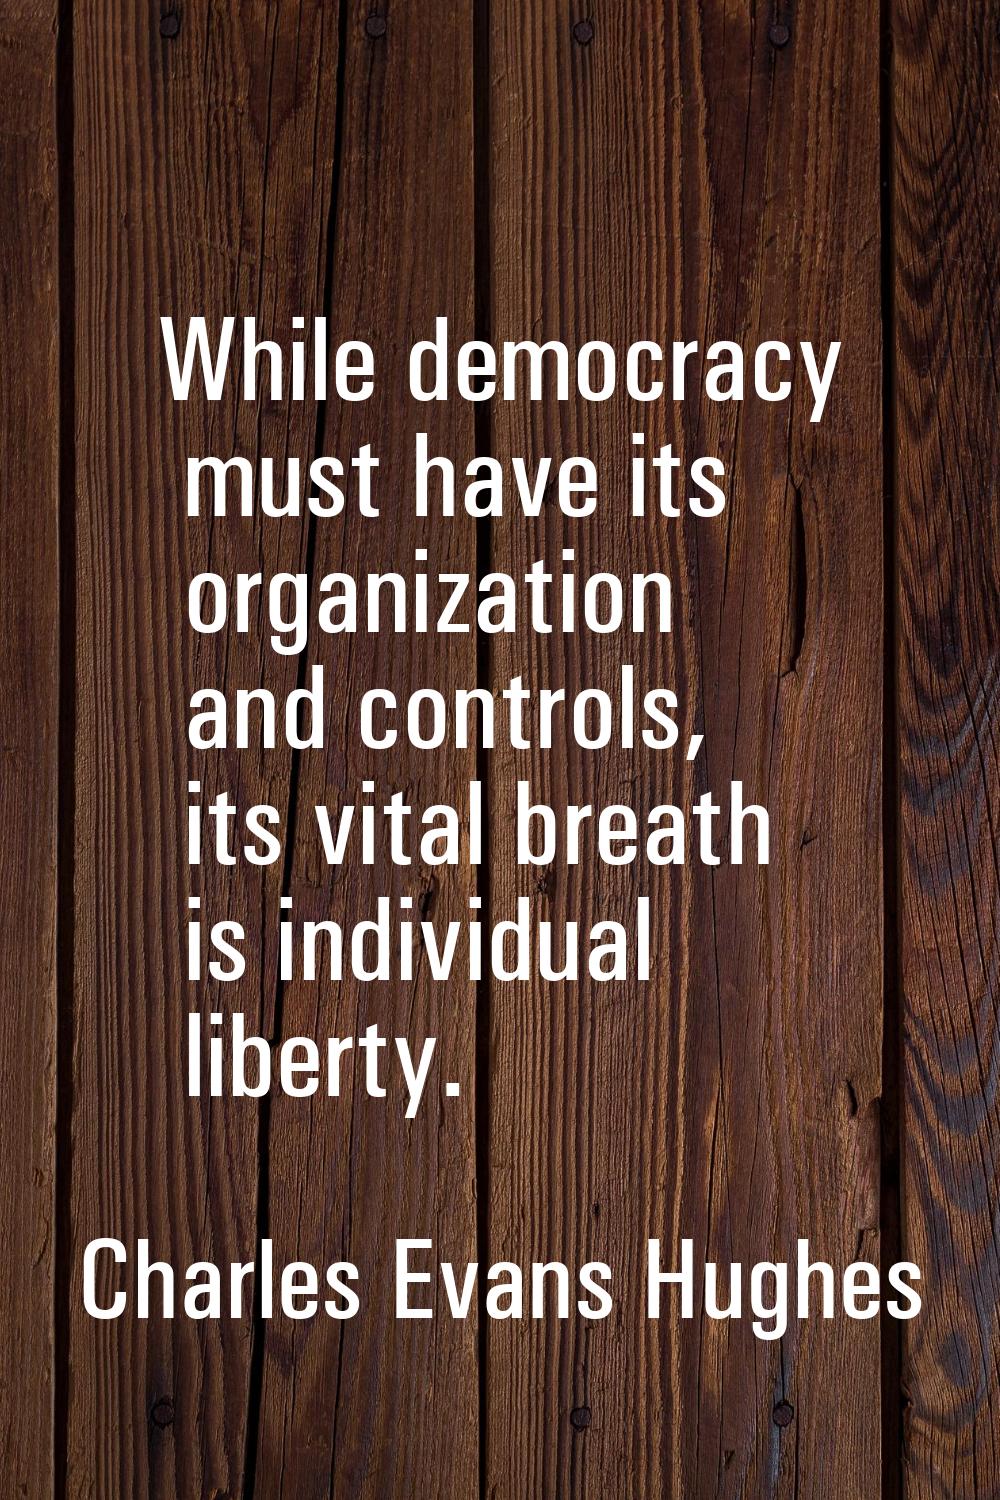 While democracy must have its organization and controls, its vital breath is individual liberty.